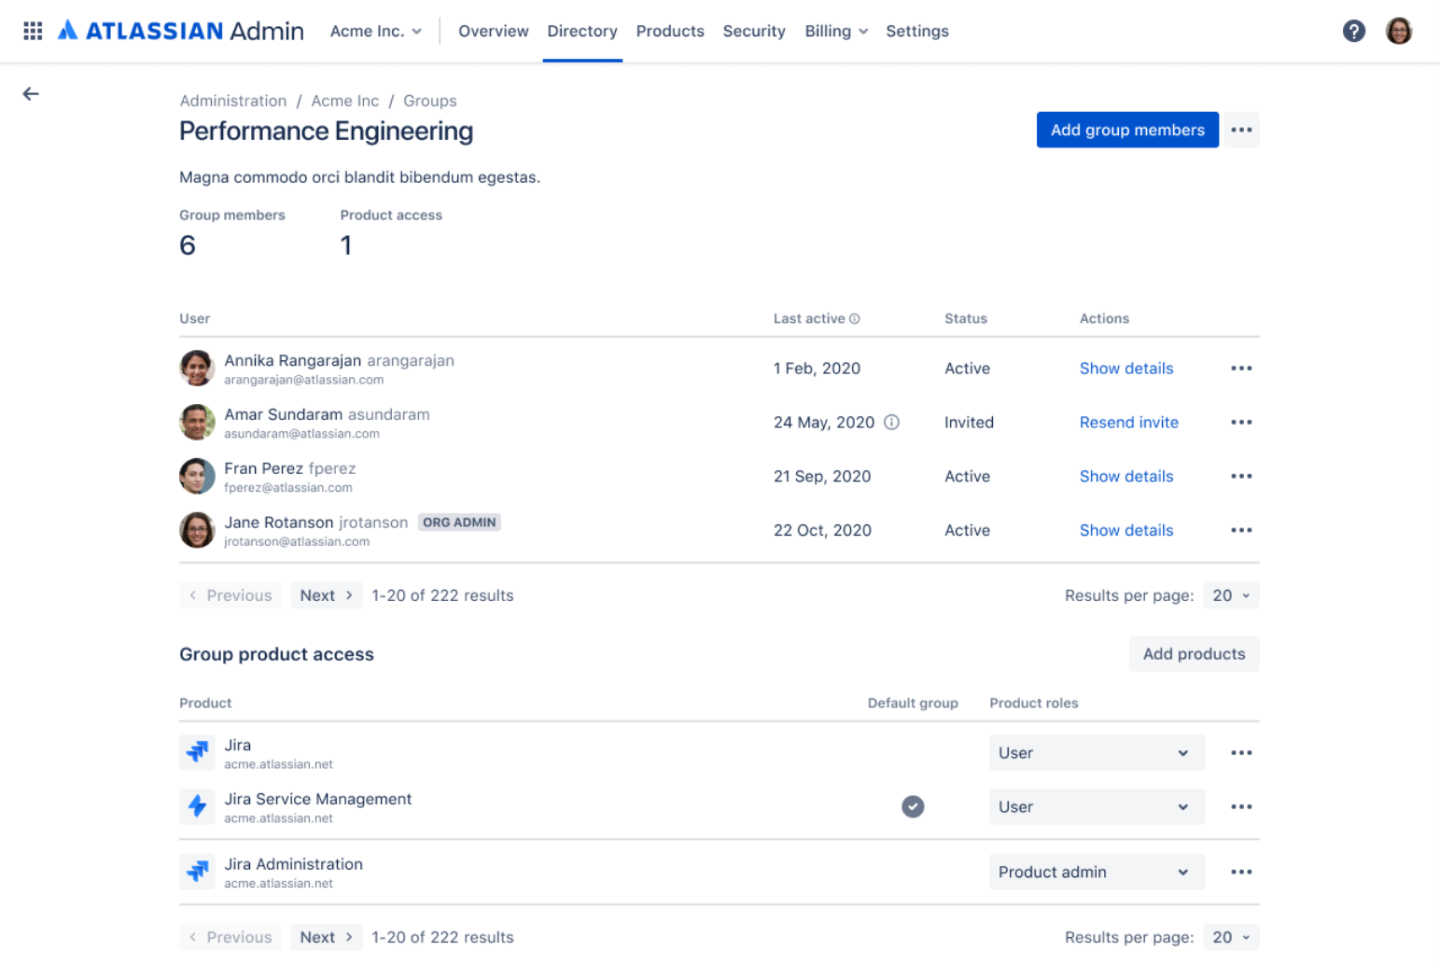 Group details page, group product access, product admin role for Jira Administration